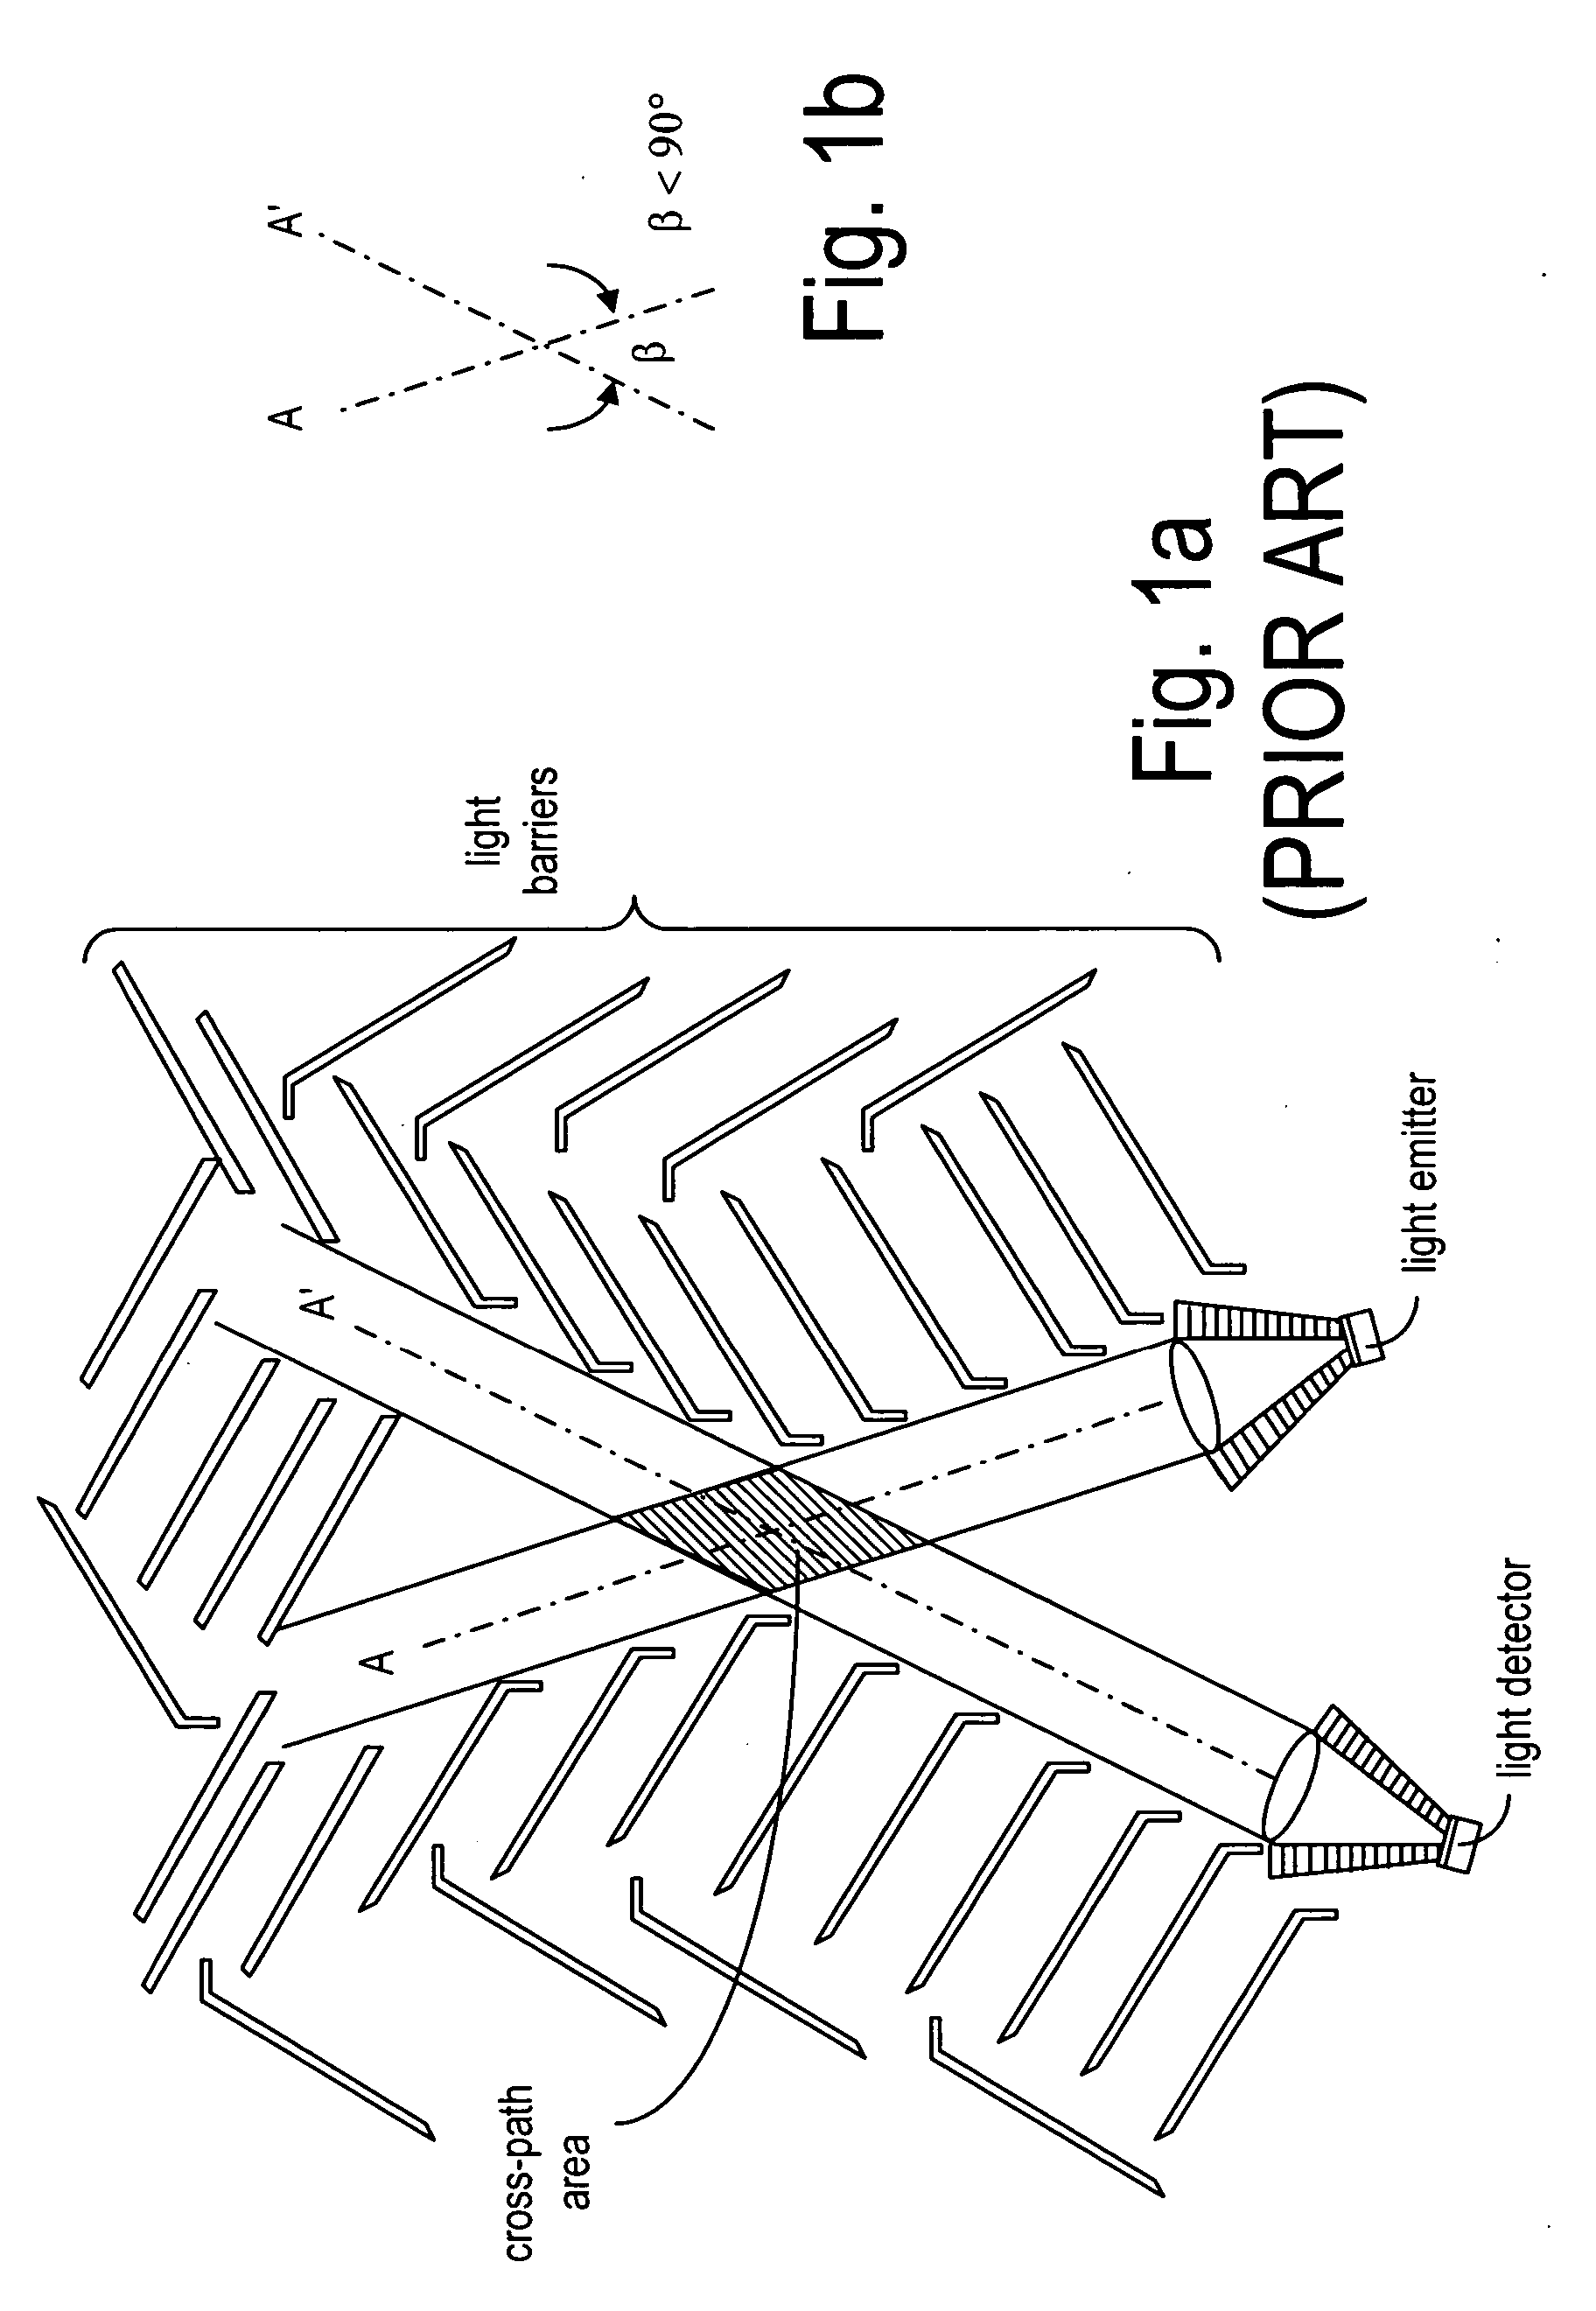 Electronic device having a proximity detector